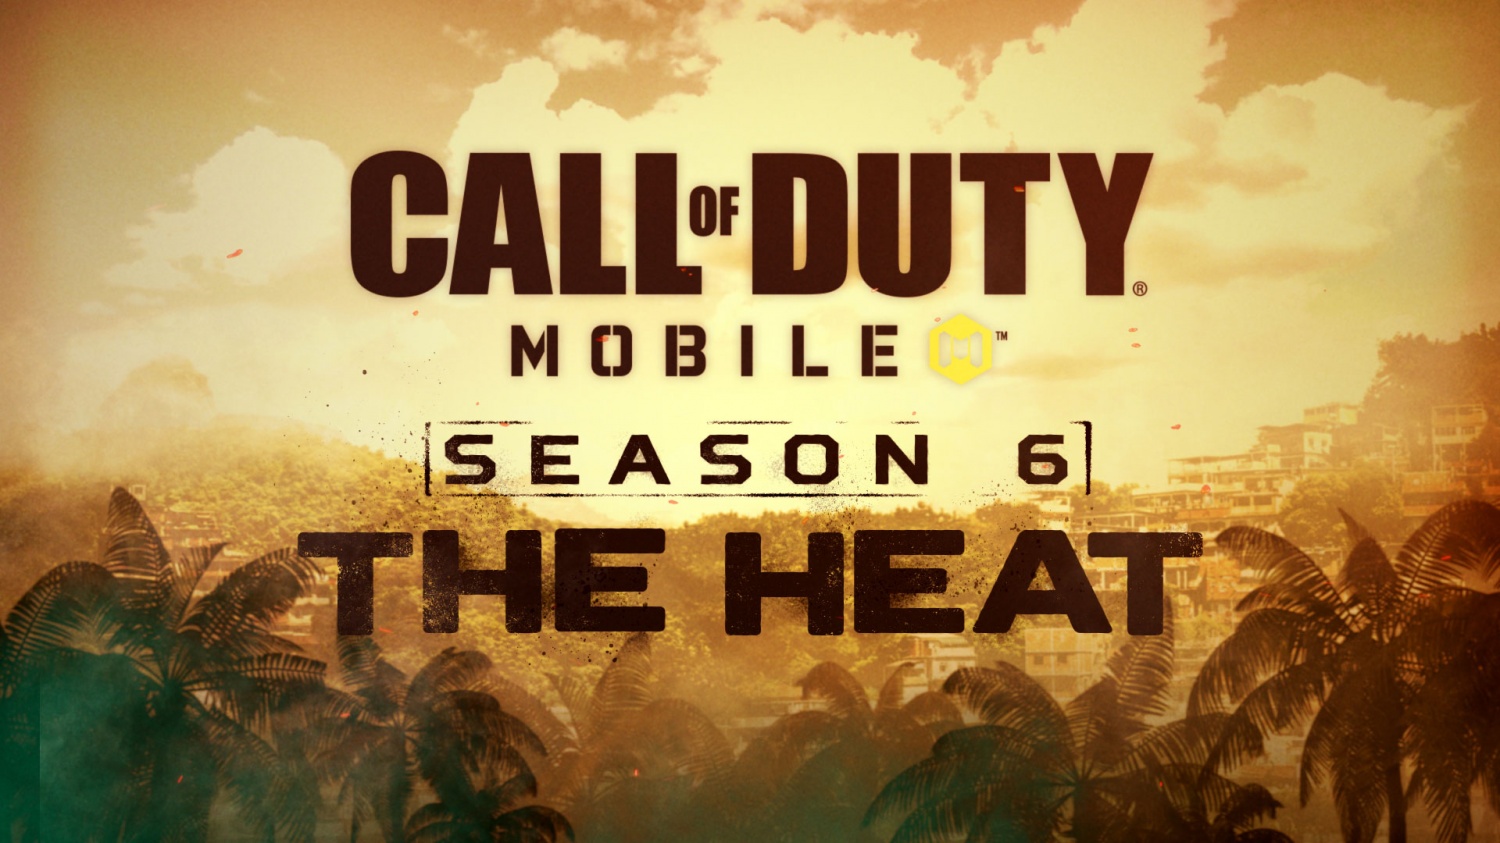 'Call of Duty Mobile' Season 6 Announced What is It Called and What